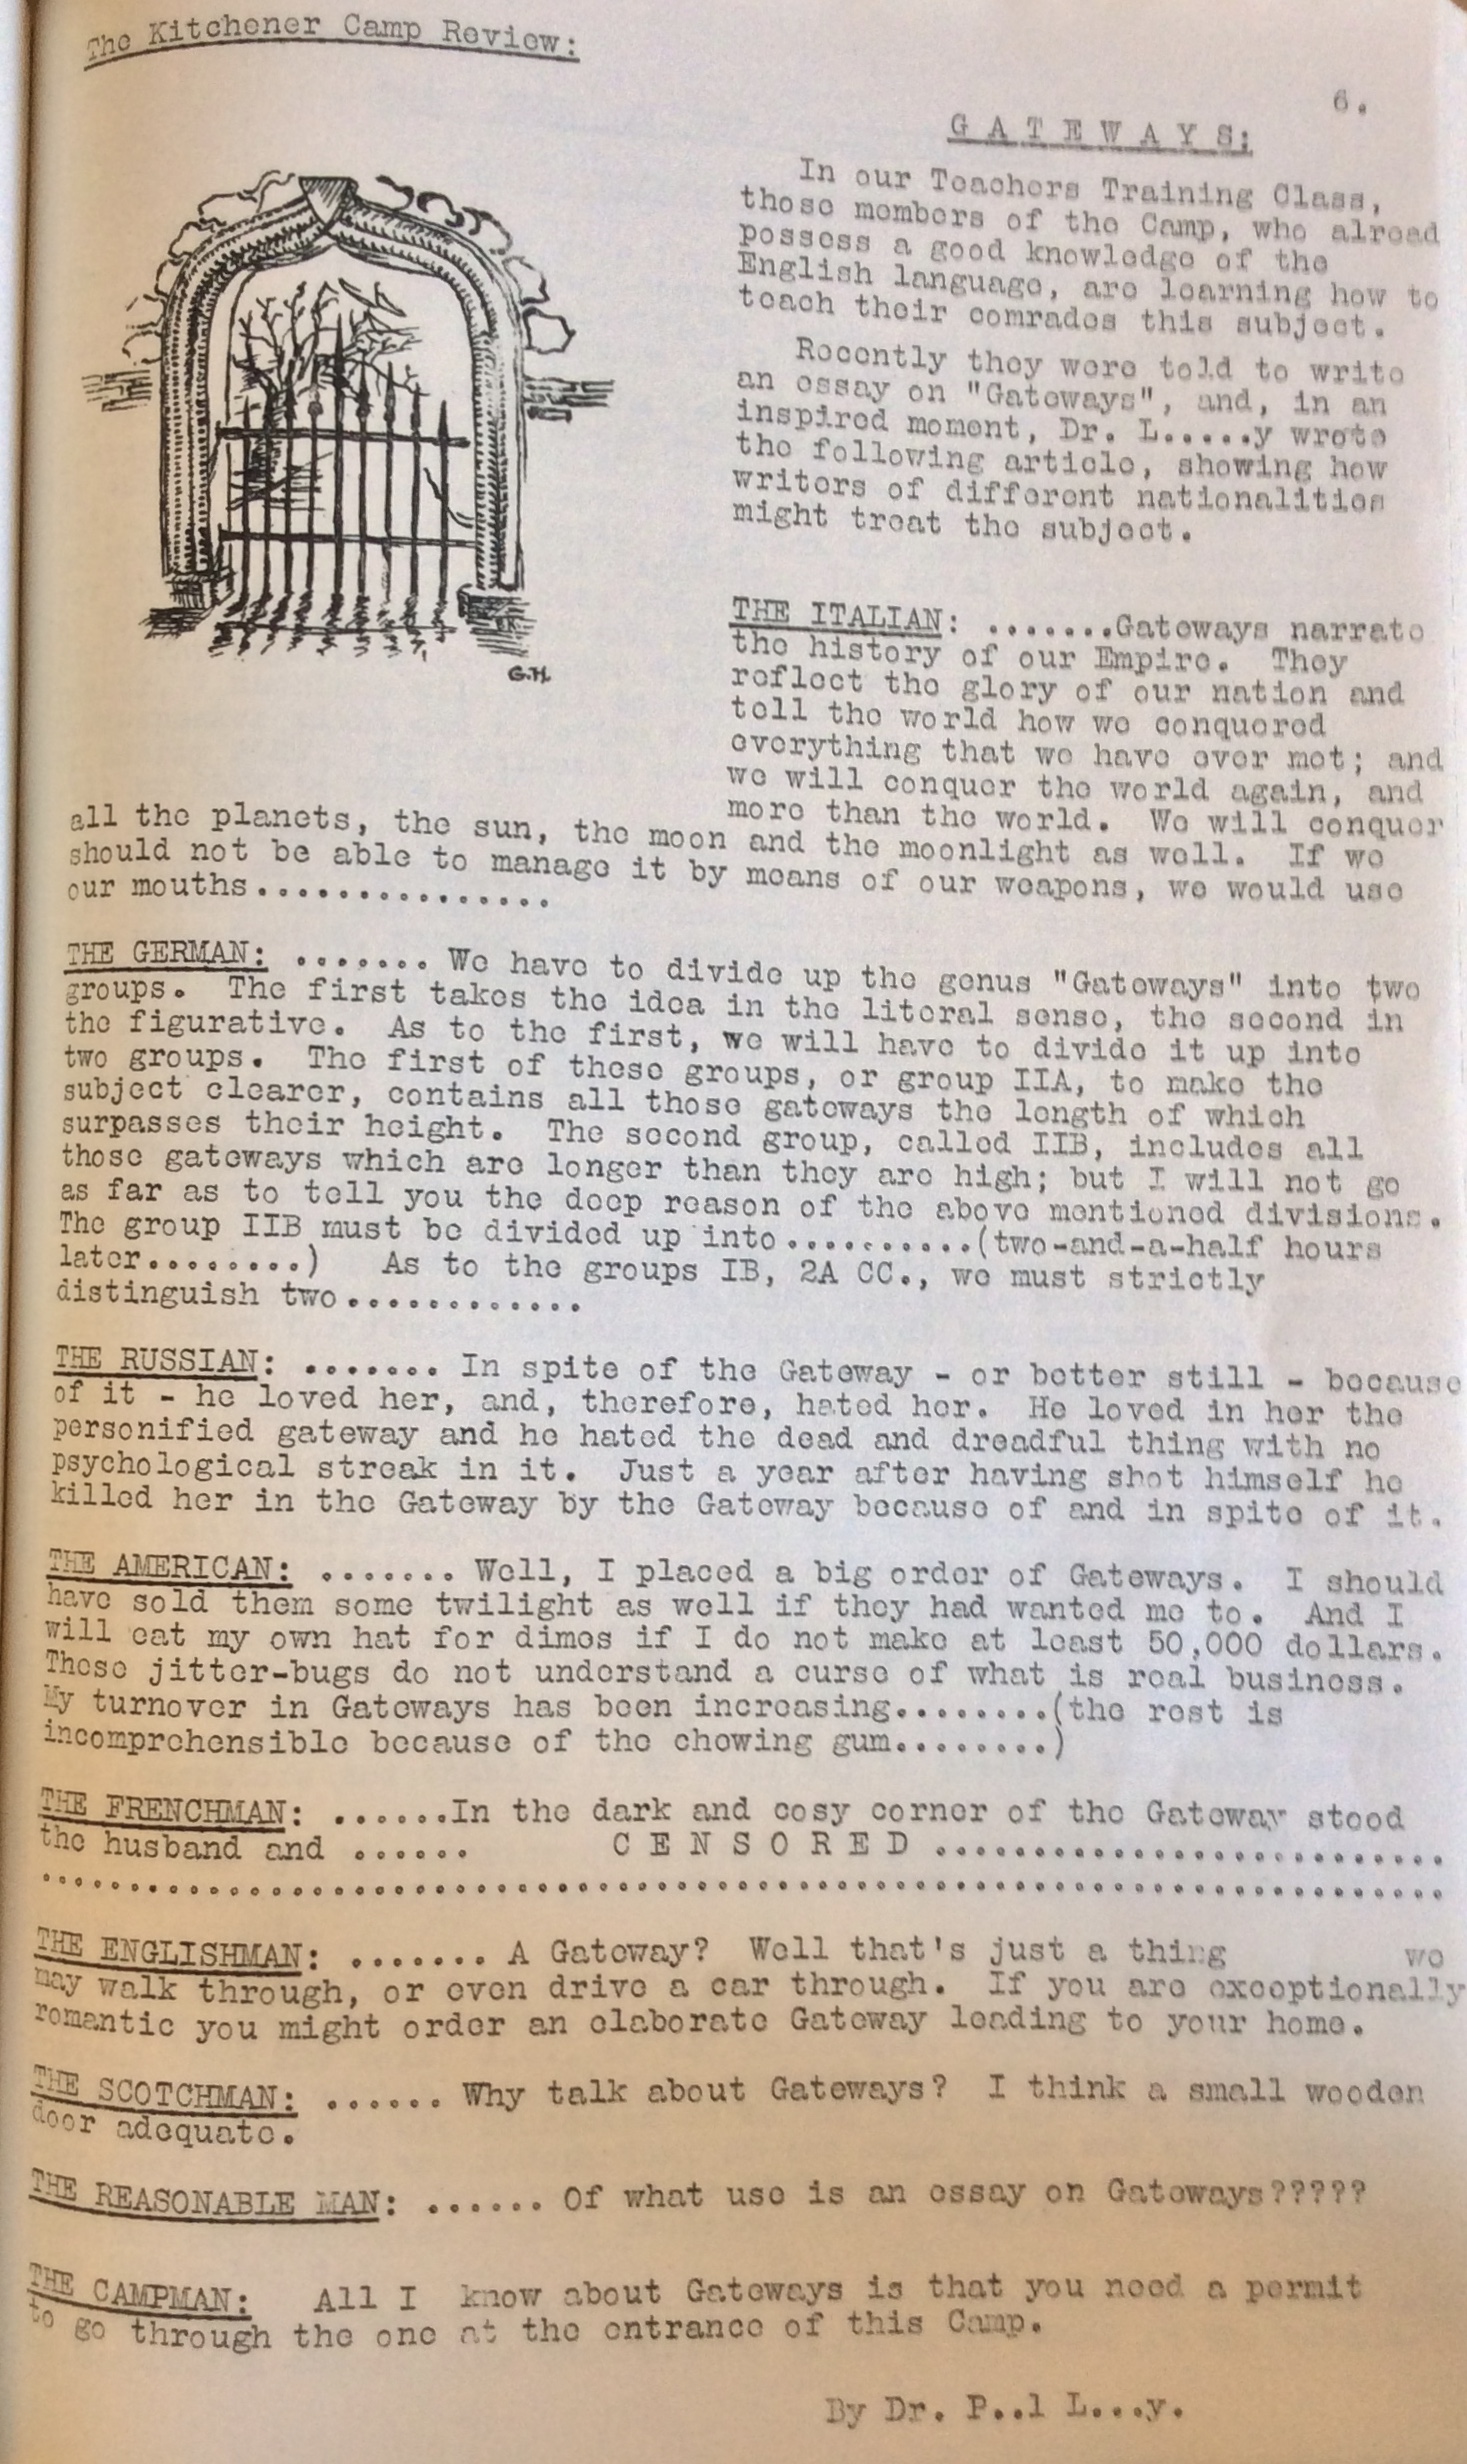 The Kitchener Camp Review, July 1939, No. 5, page 6